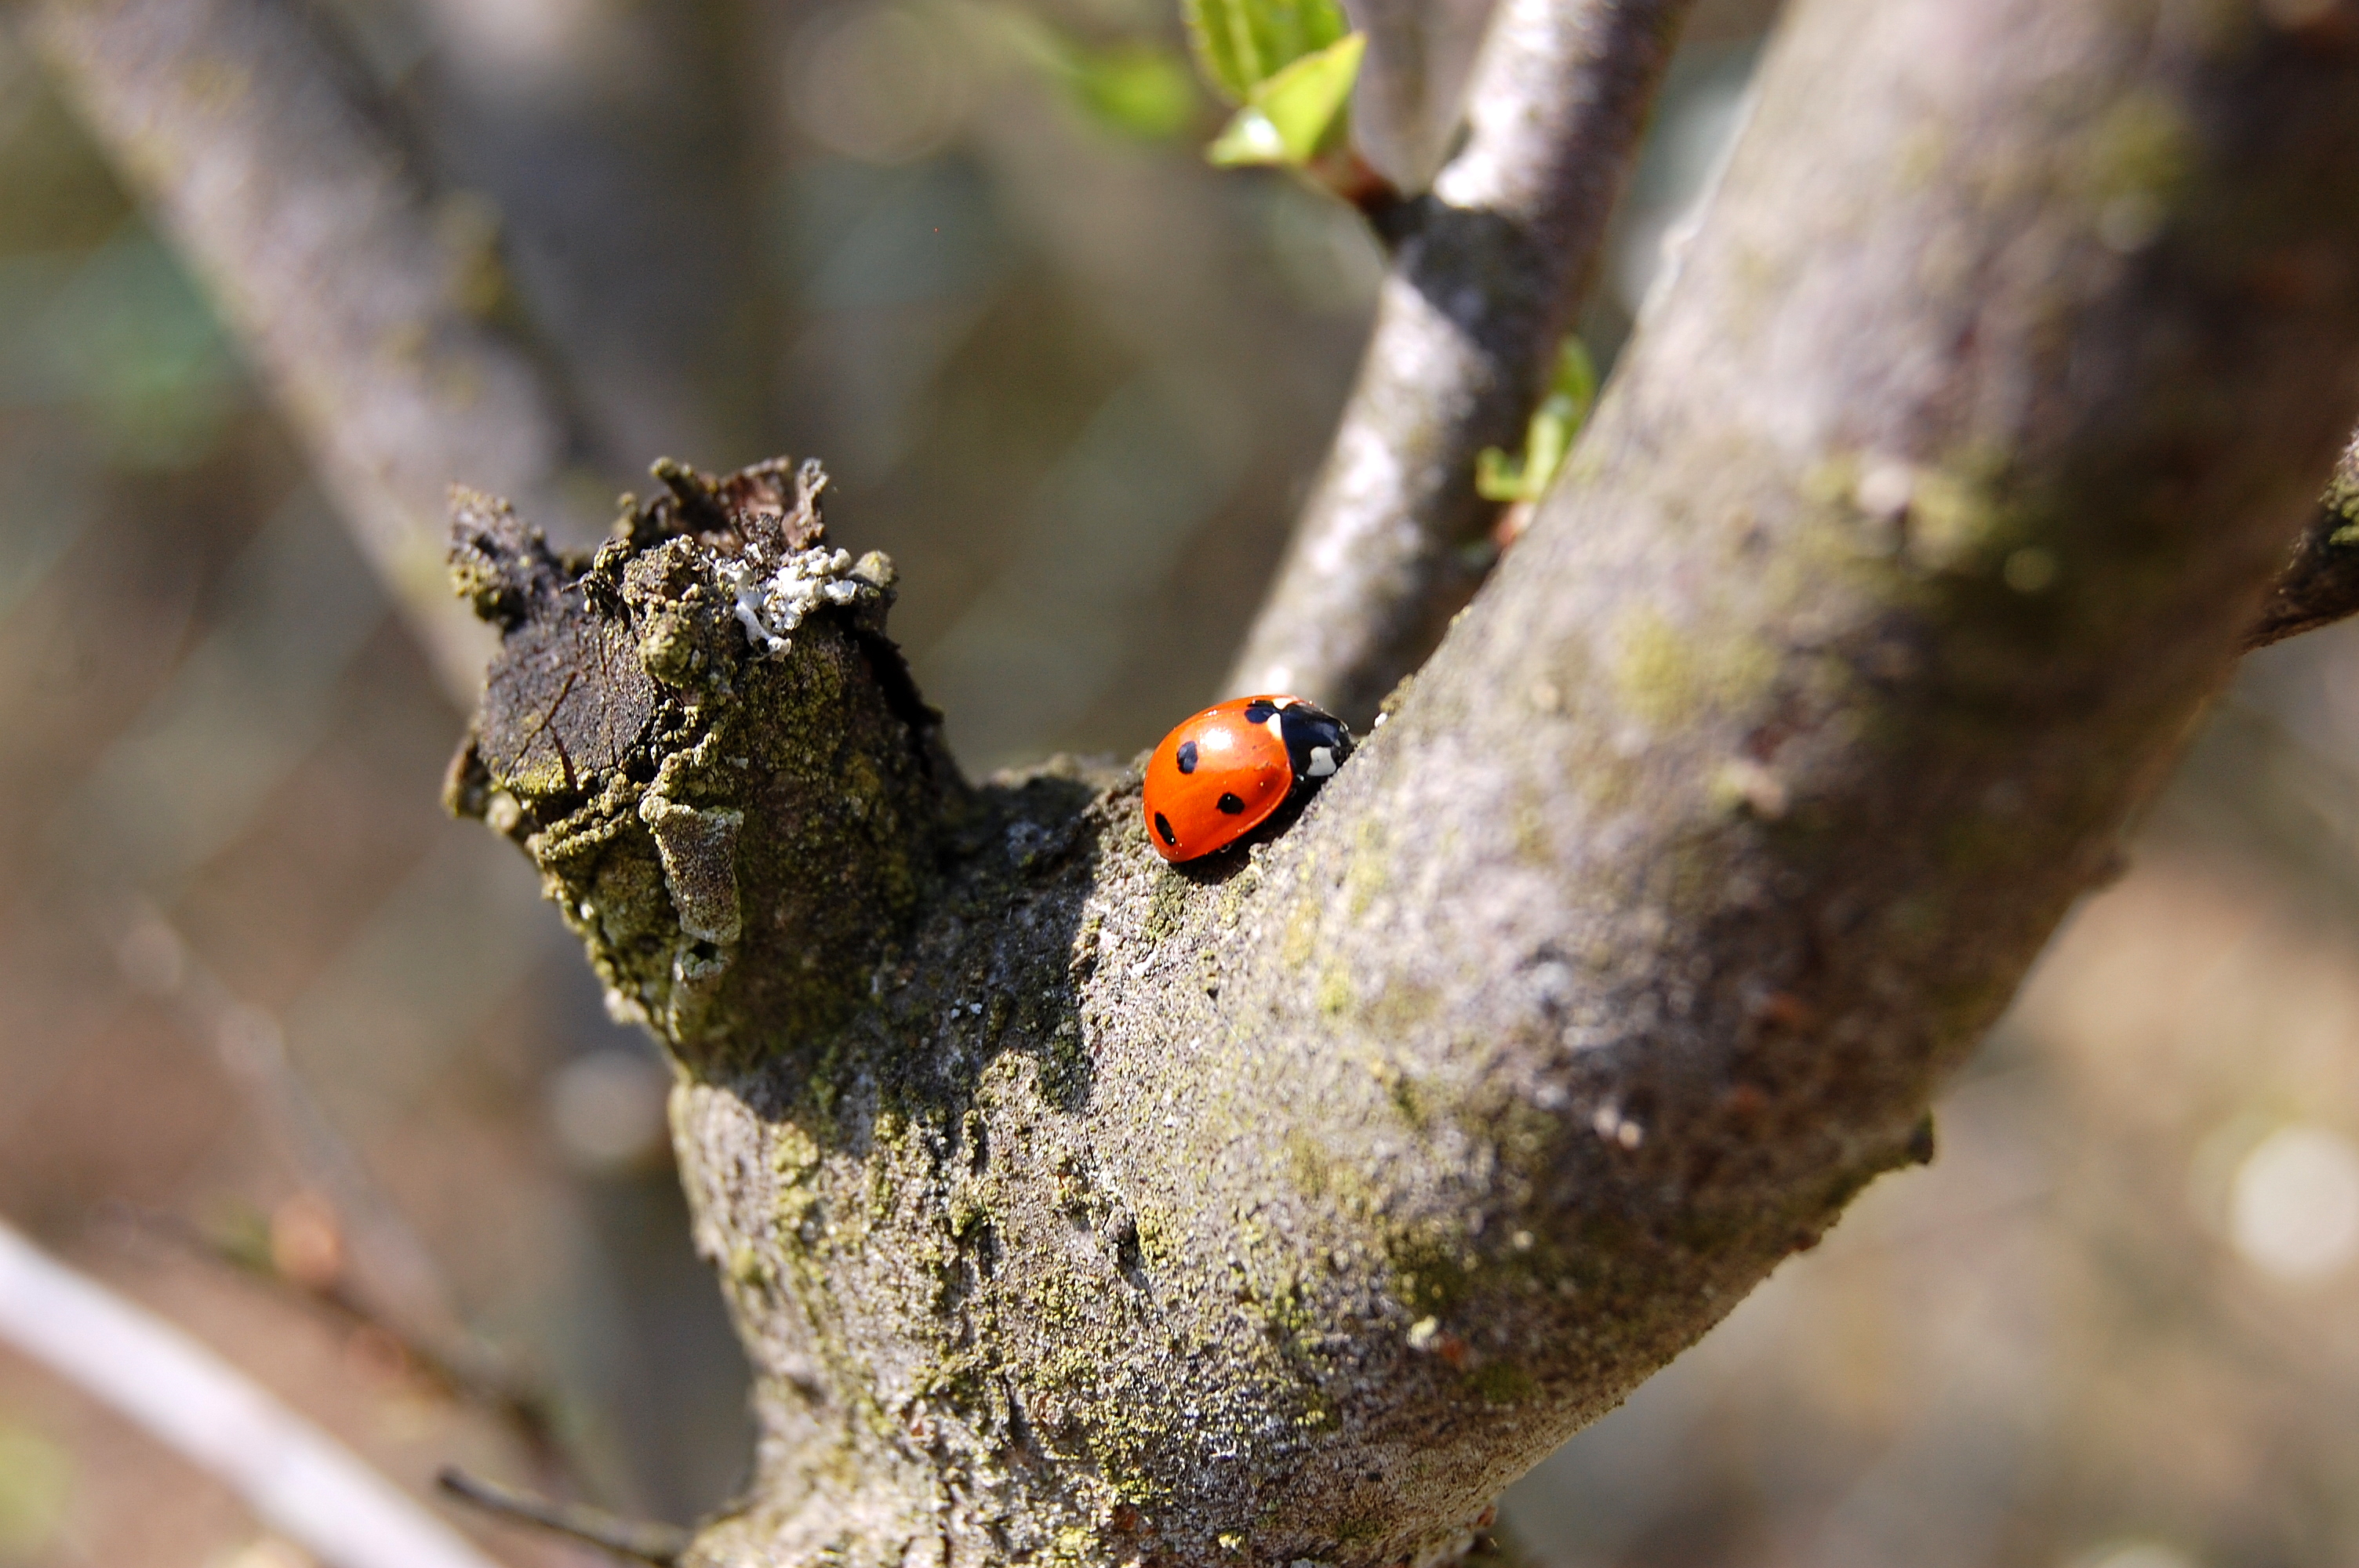 Where are u going Lady Bug?, Insect, Ladybug, Nature, Tree, HQ Photo